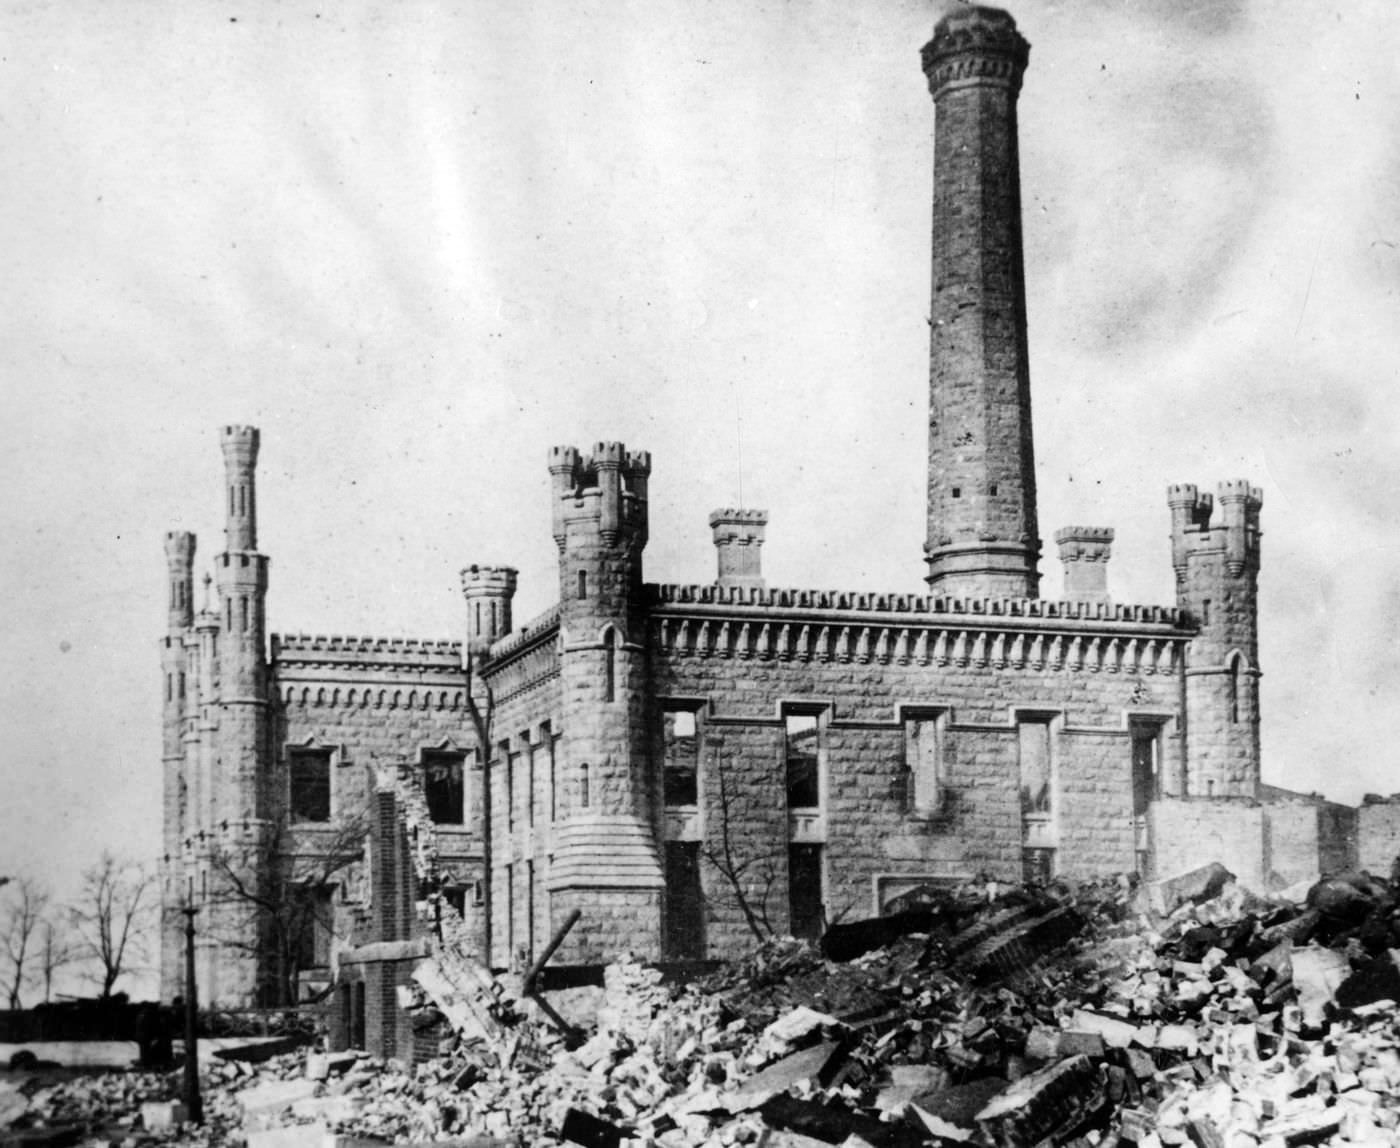 The view looking north shows the Pumping Station after the Great Chicago Fire of 1871.